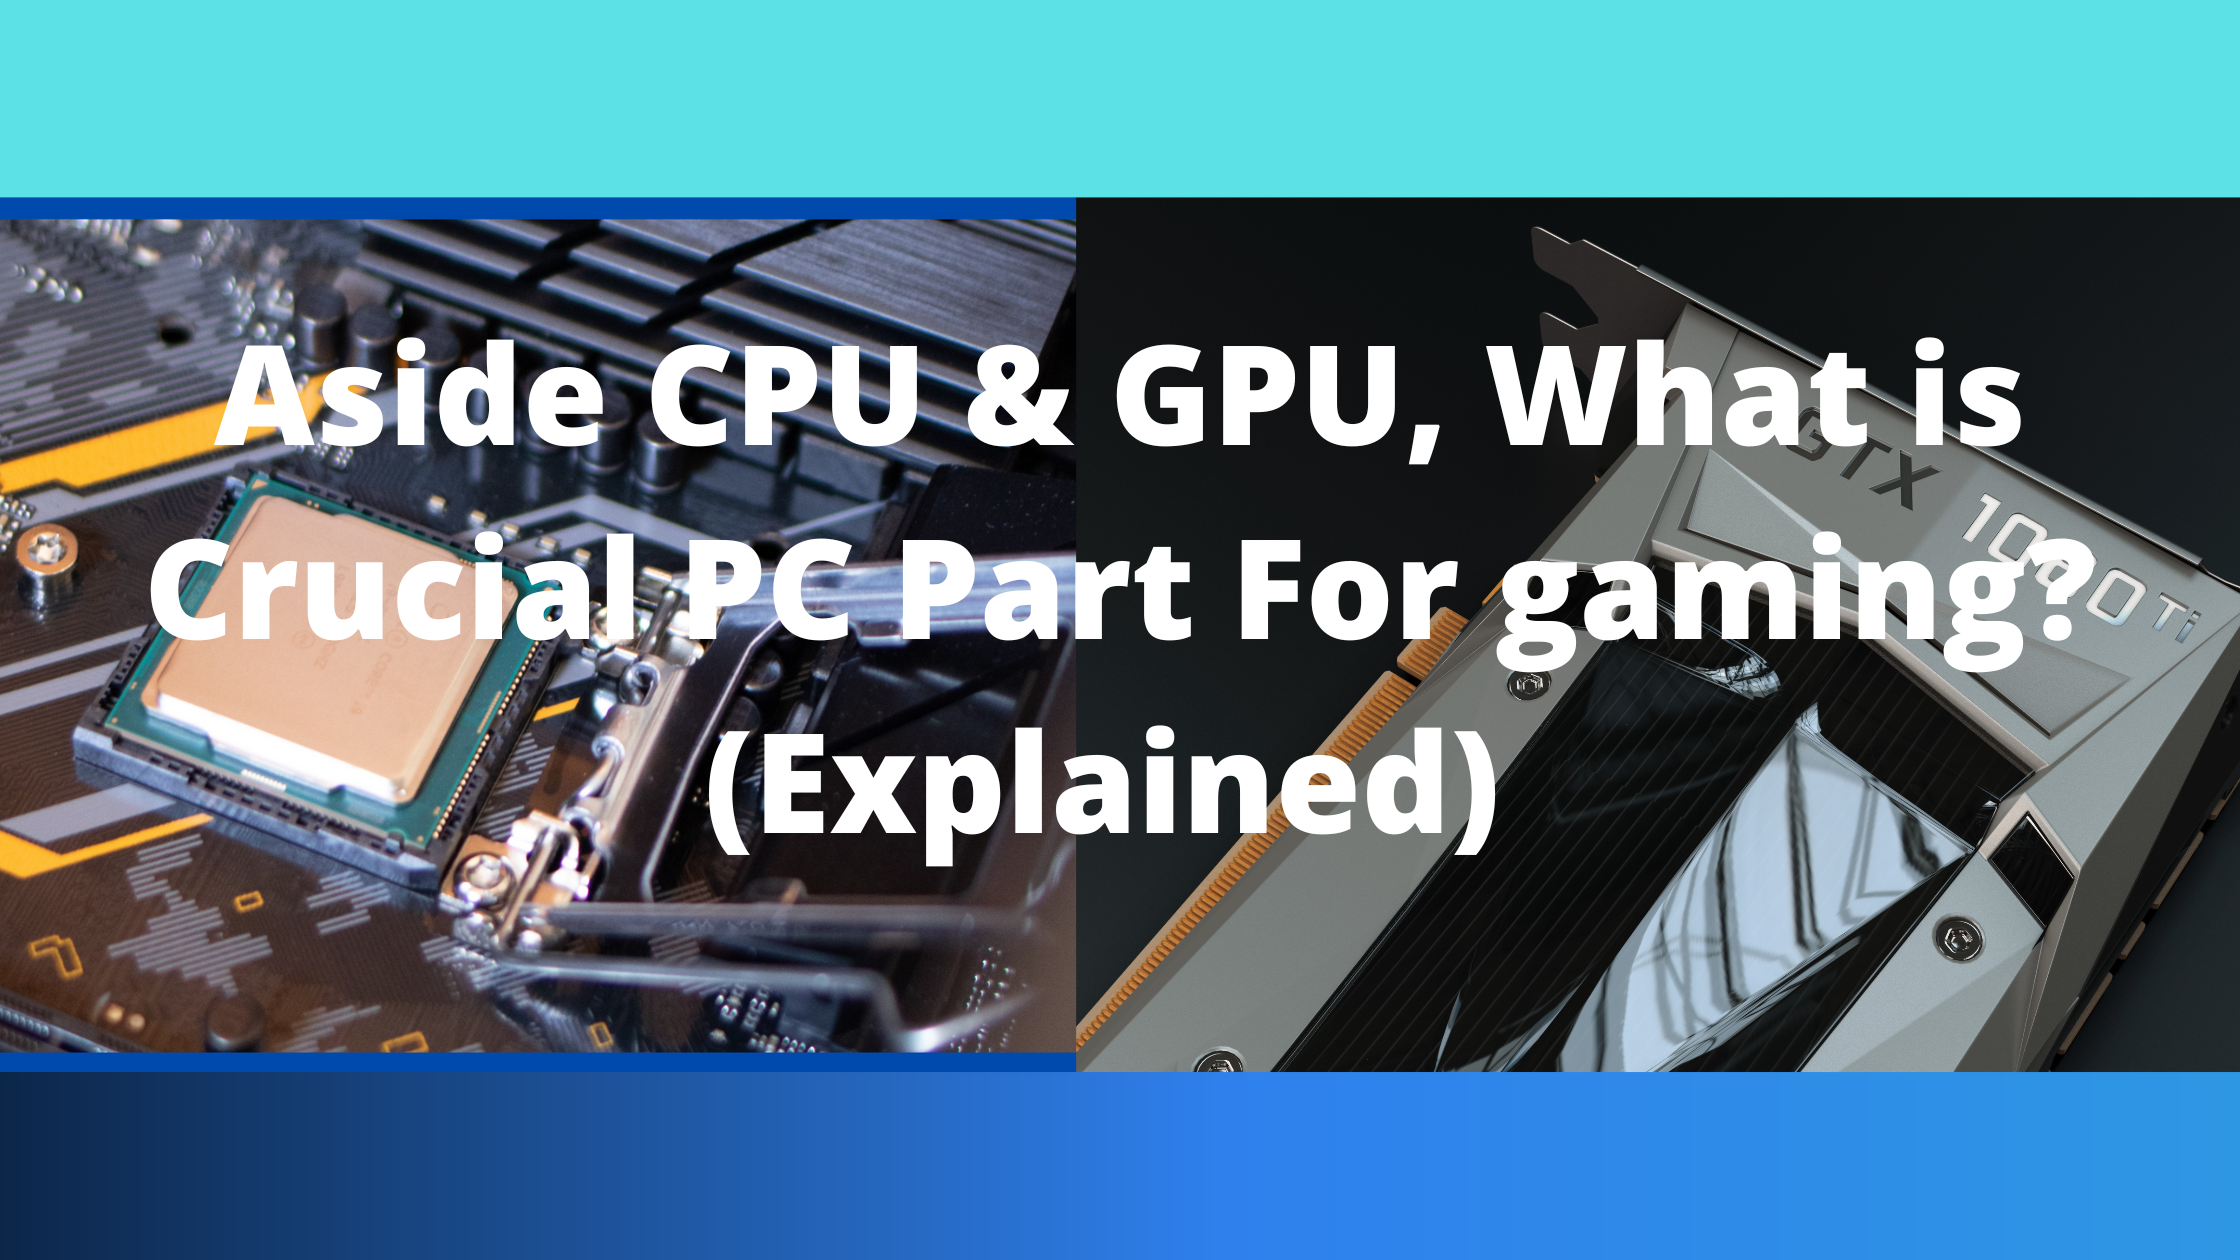 Aside CPU & GPU, What is Crucial PC Part For gaming? (Explained)